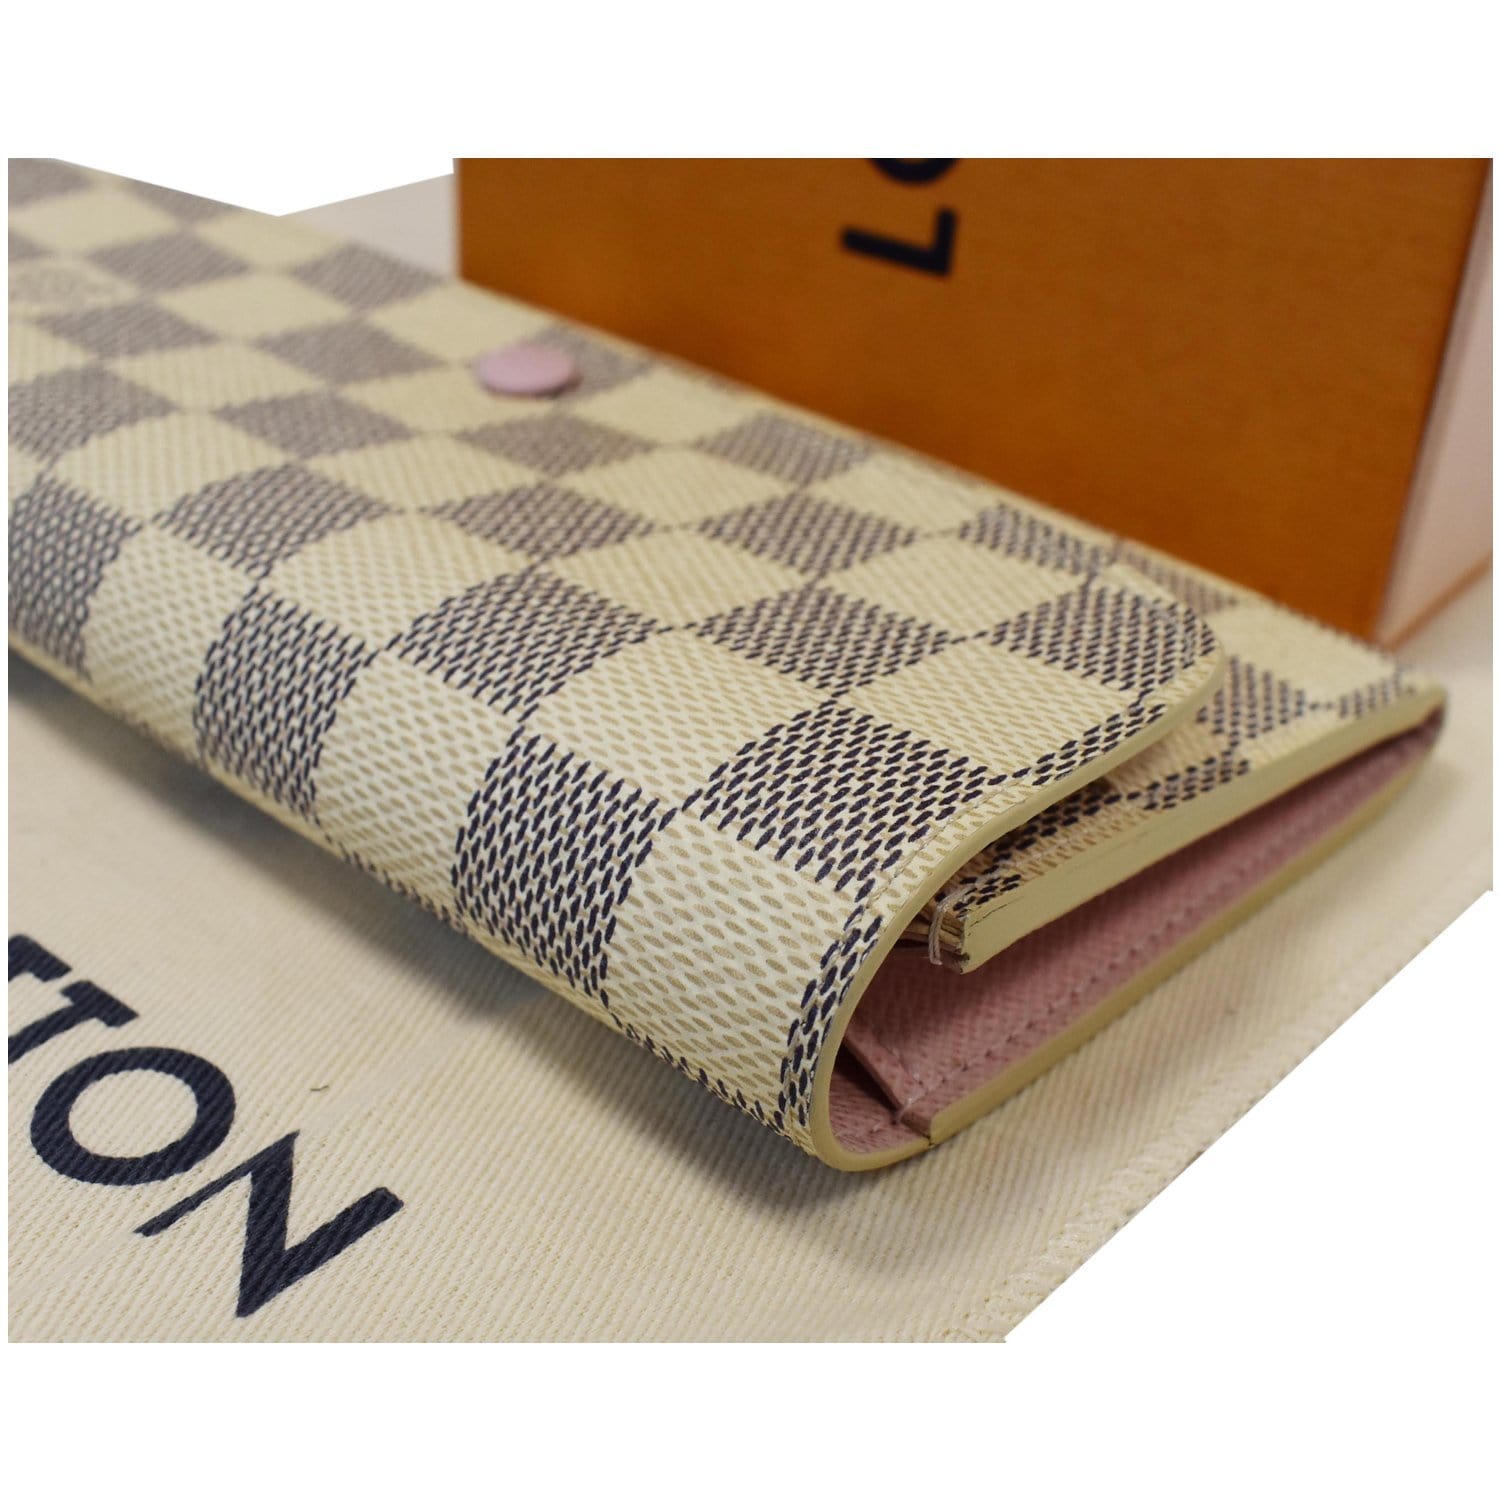 Louis Vuitton White Multicolor French Purse Wallet at Jill's